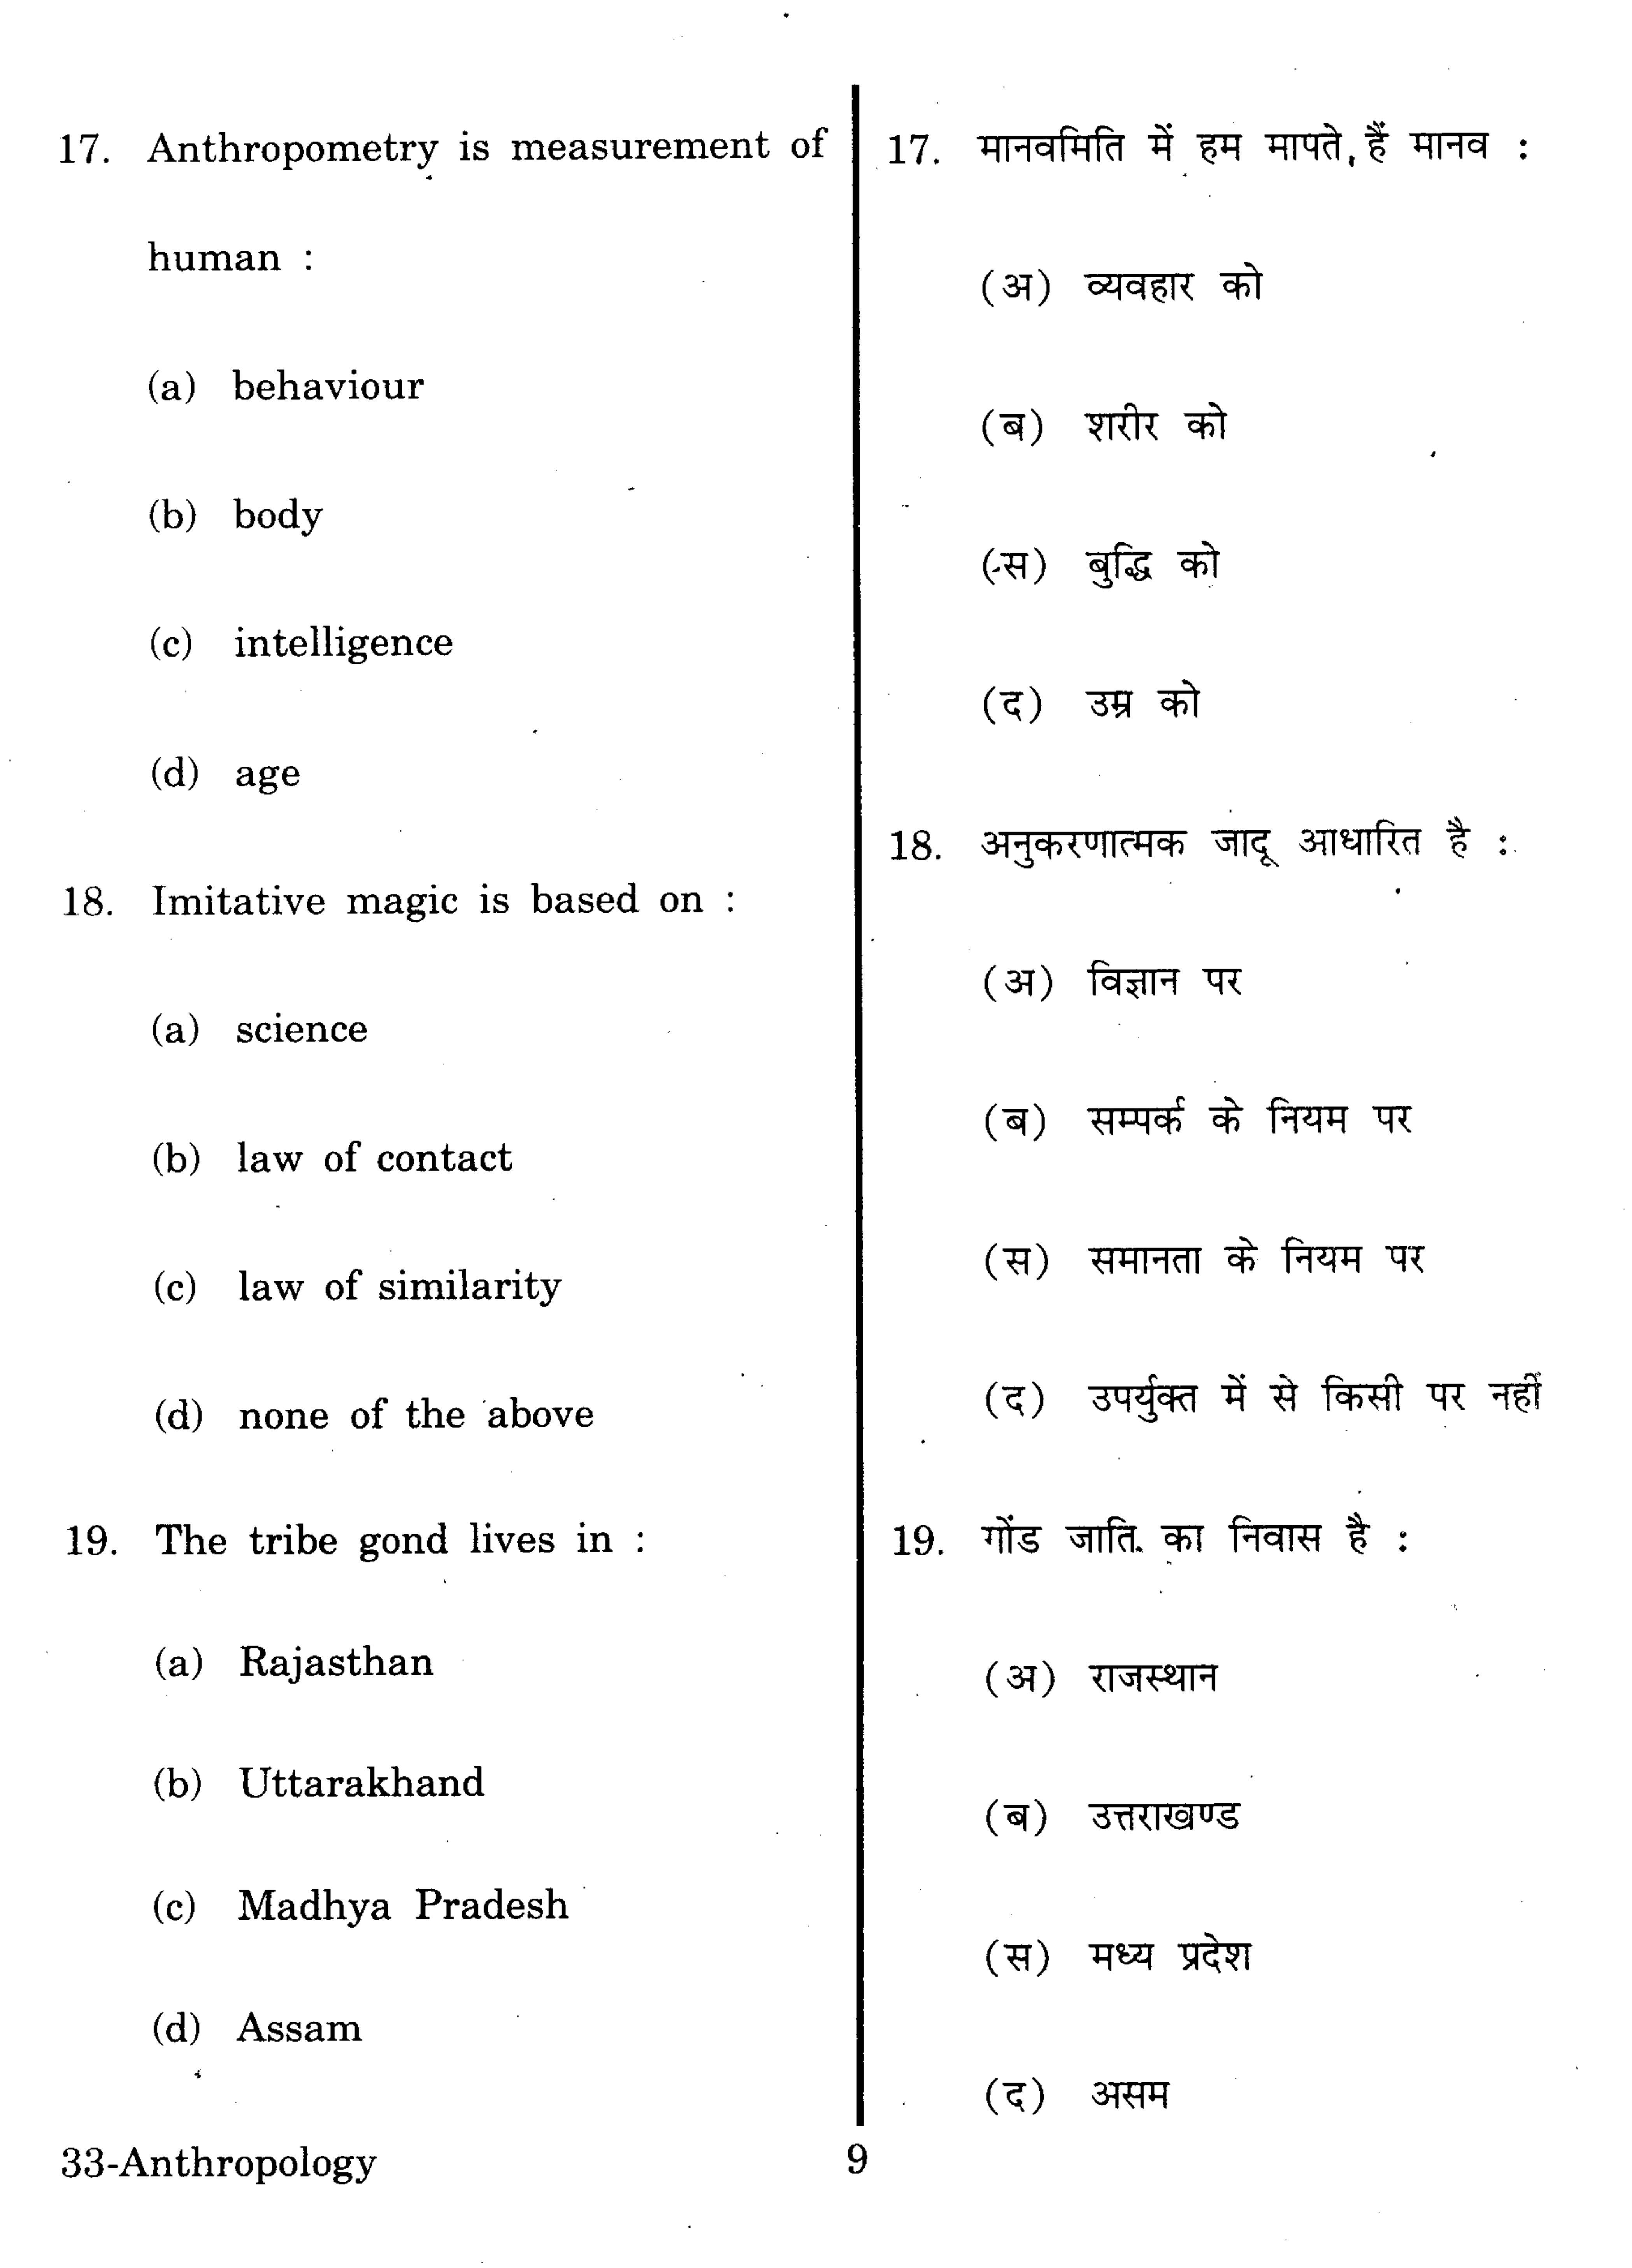 URATPG Anthropology 2013 Question Paper - Page 8